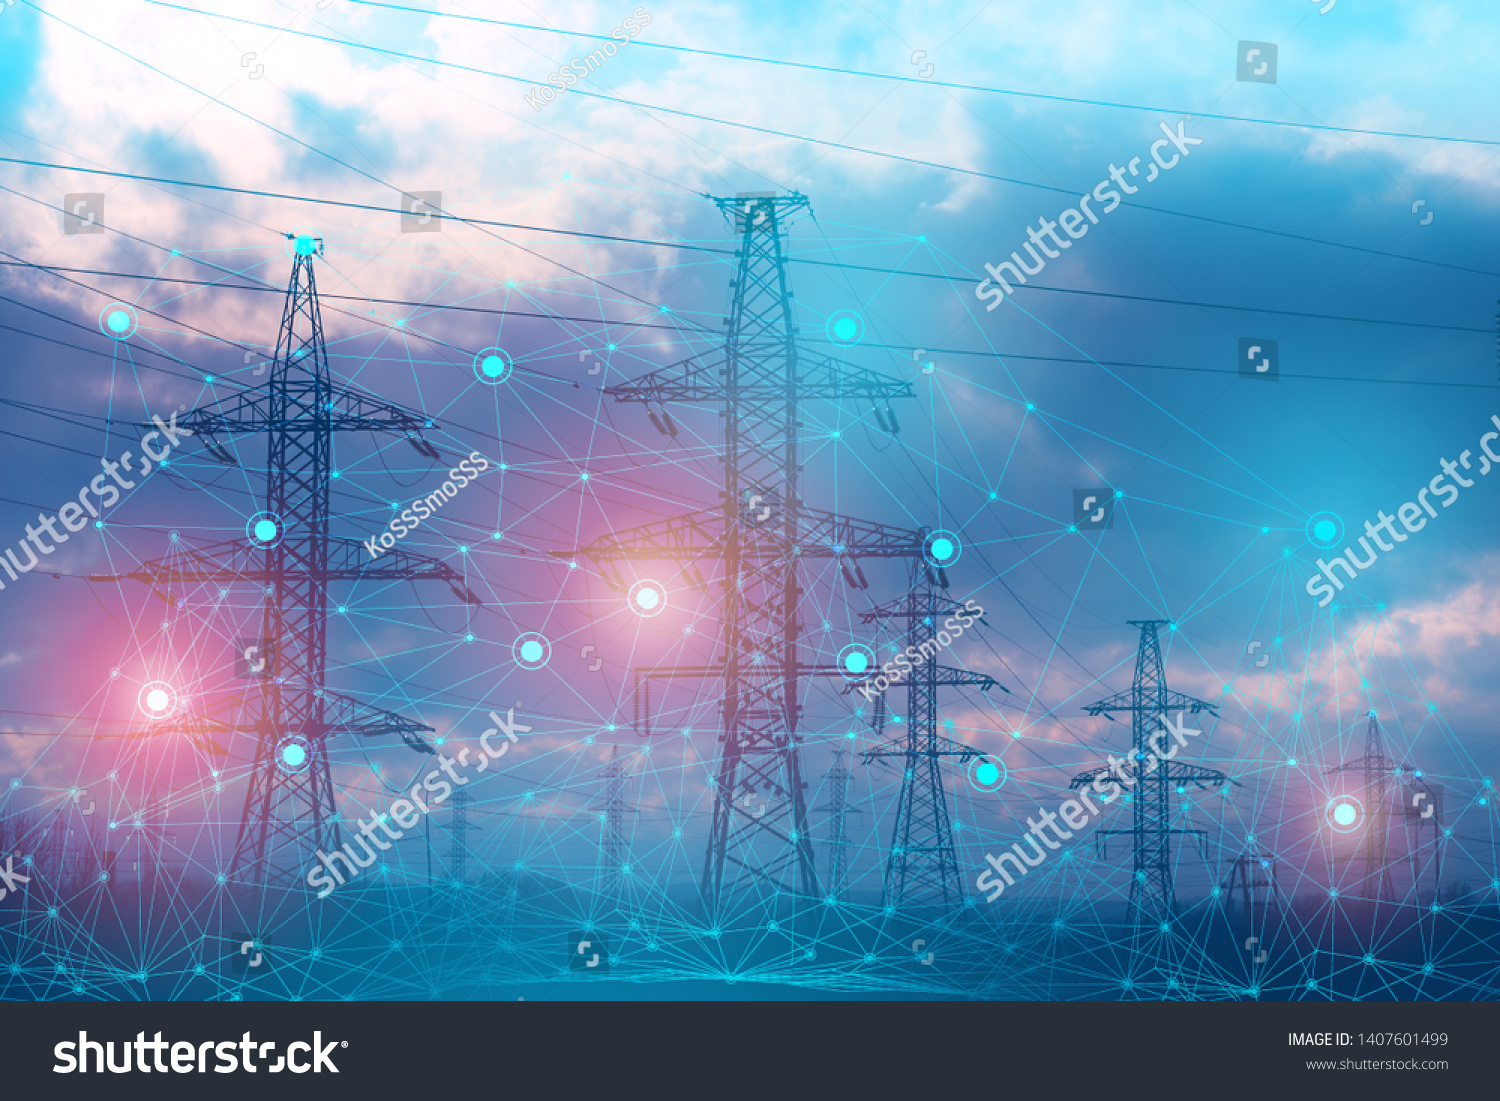 an abstract representation of solving problems using artificial intelligence to increase reliability and reduce losses and accidents during the transmission of electrical energy #1407601499